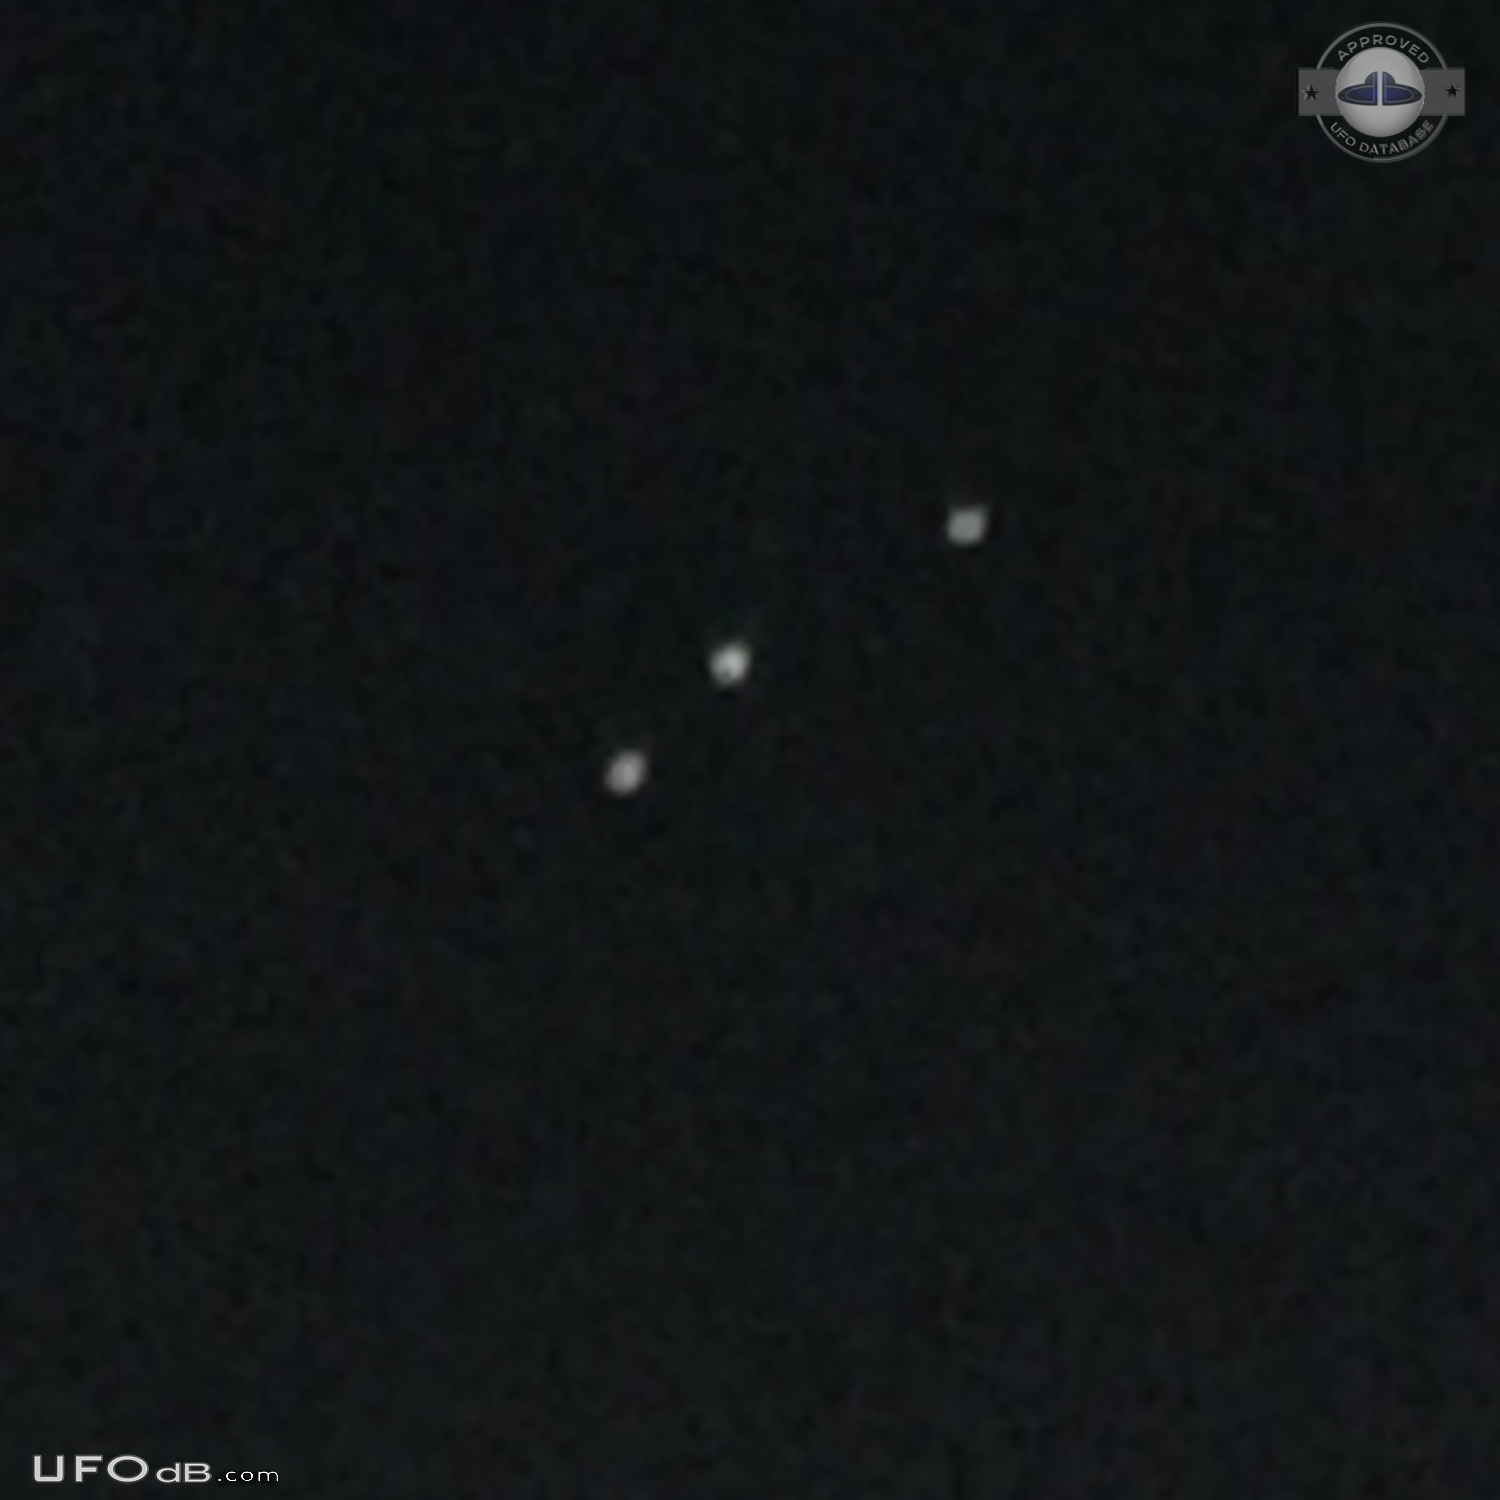 3 large orange red colored spheres UFOs Romford London England 2016 UFO Picture #793-8